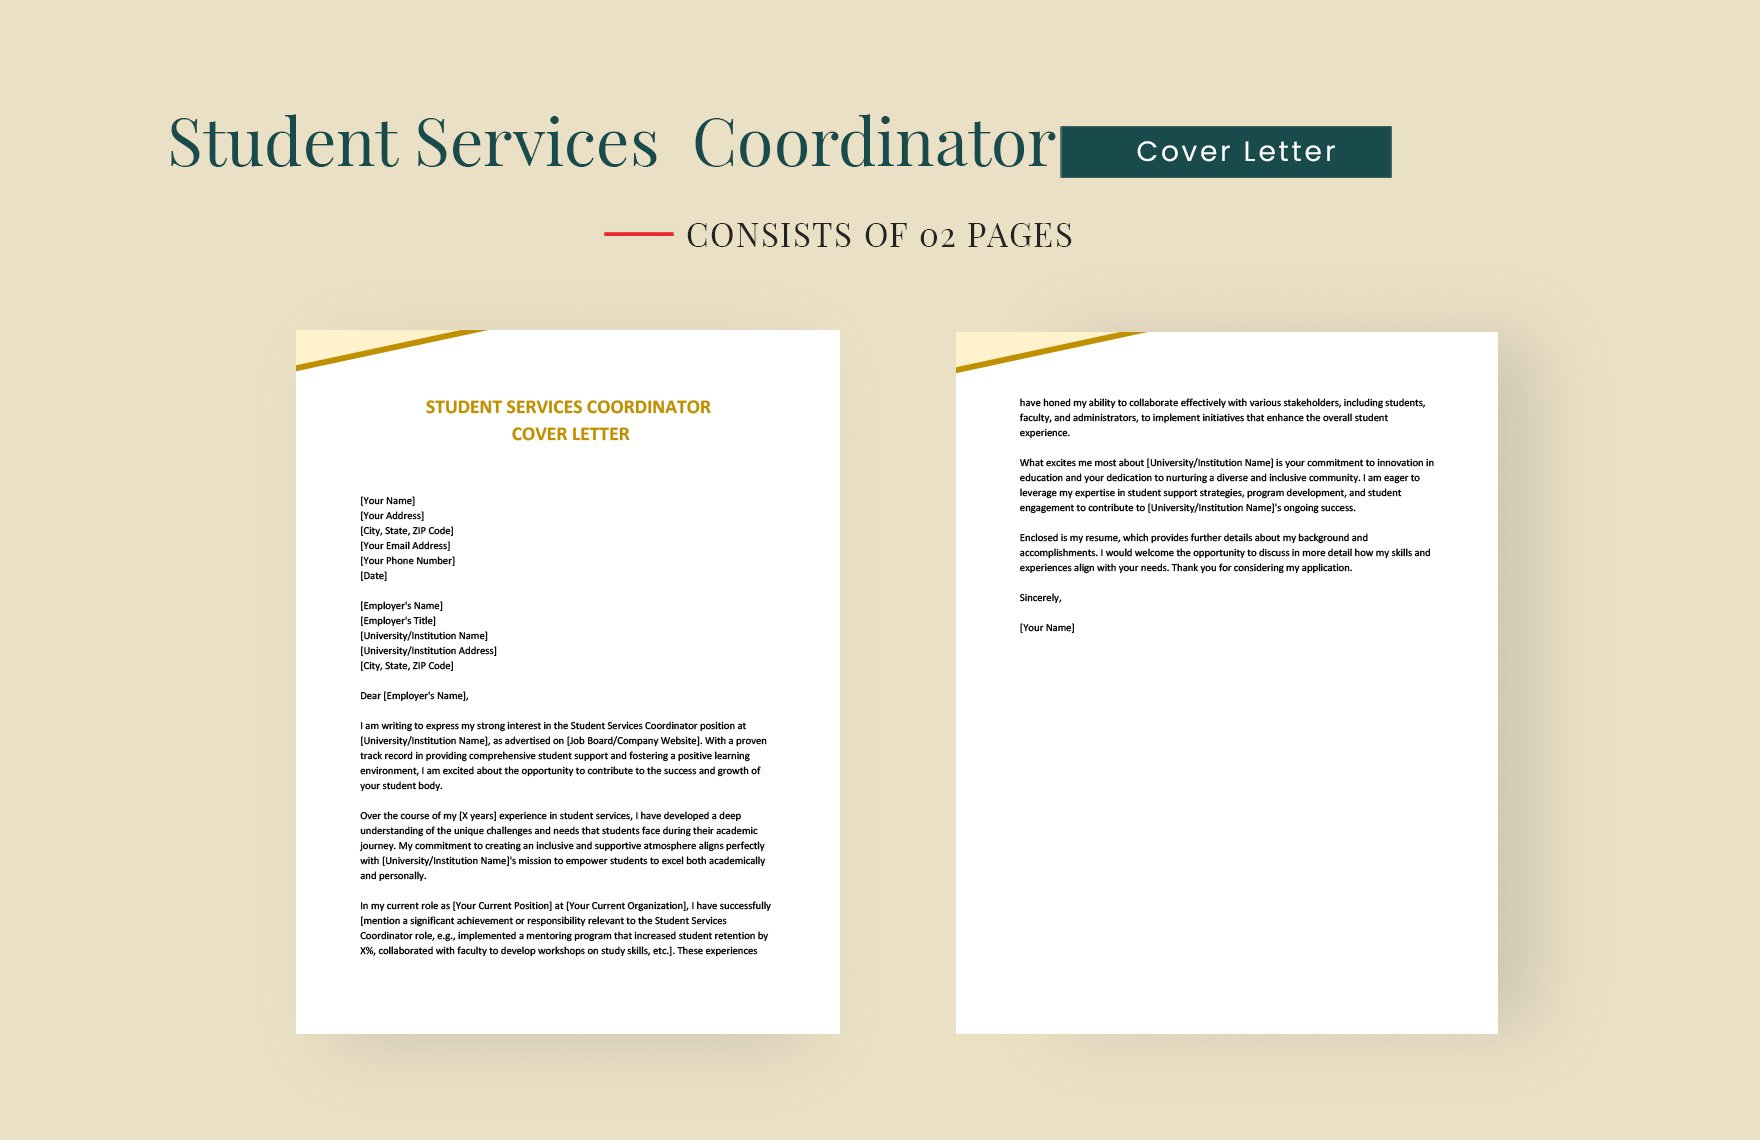 Student Services Coordinator Cover Letter